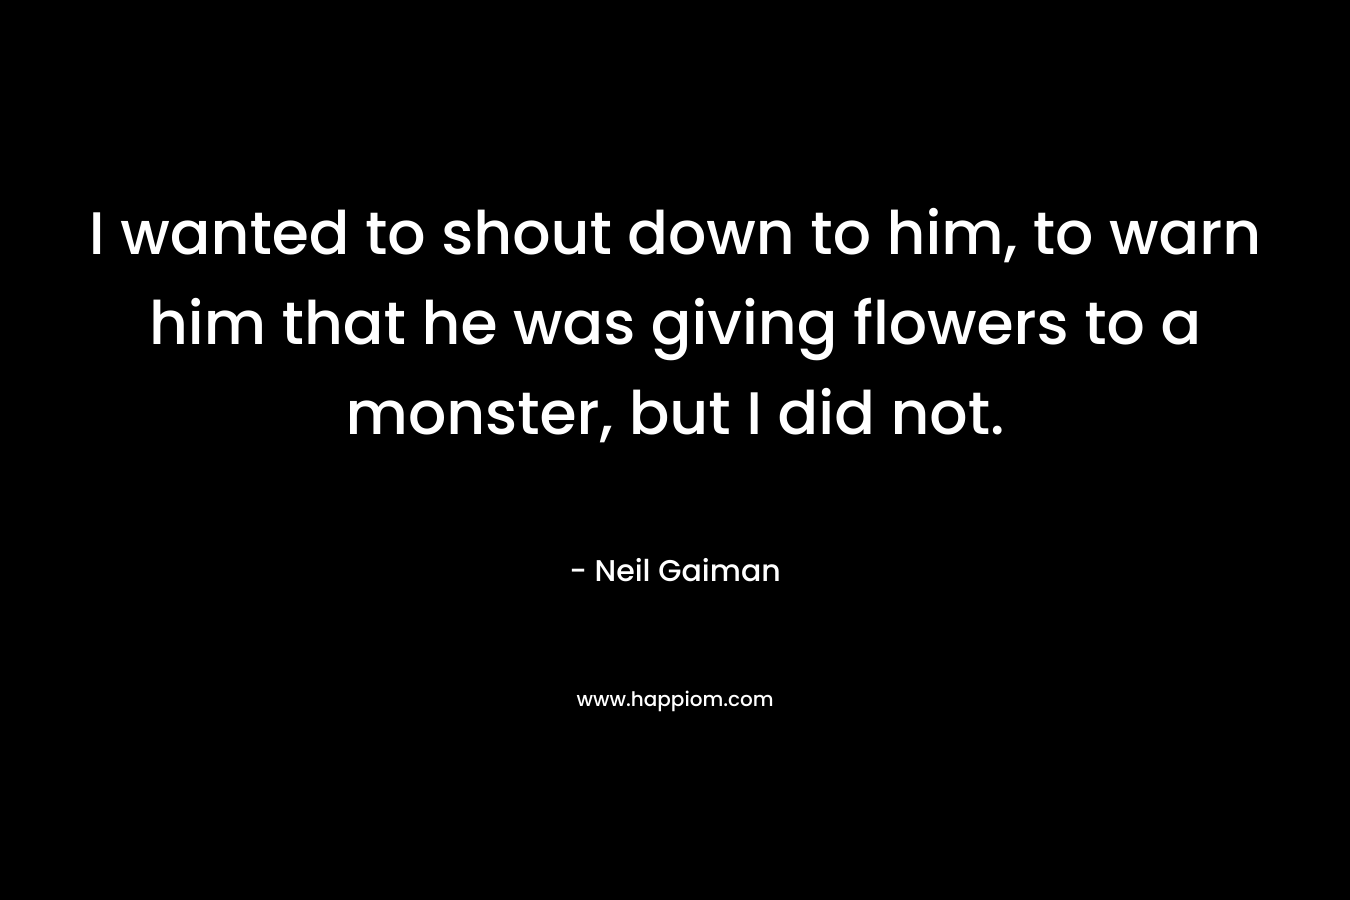 I wanted to shout down to him, to warn him that he was giving flowers to a monster, but I did not.